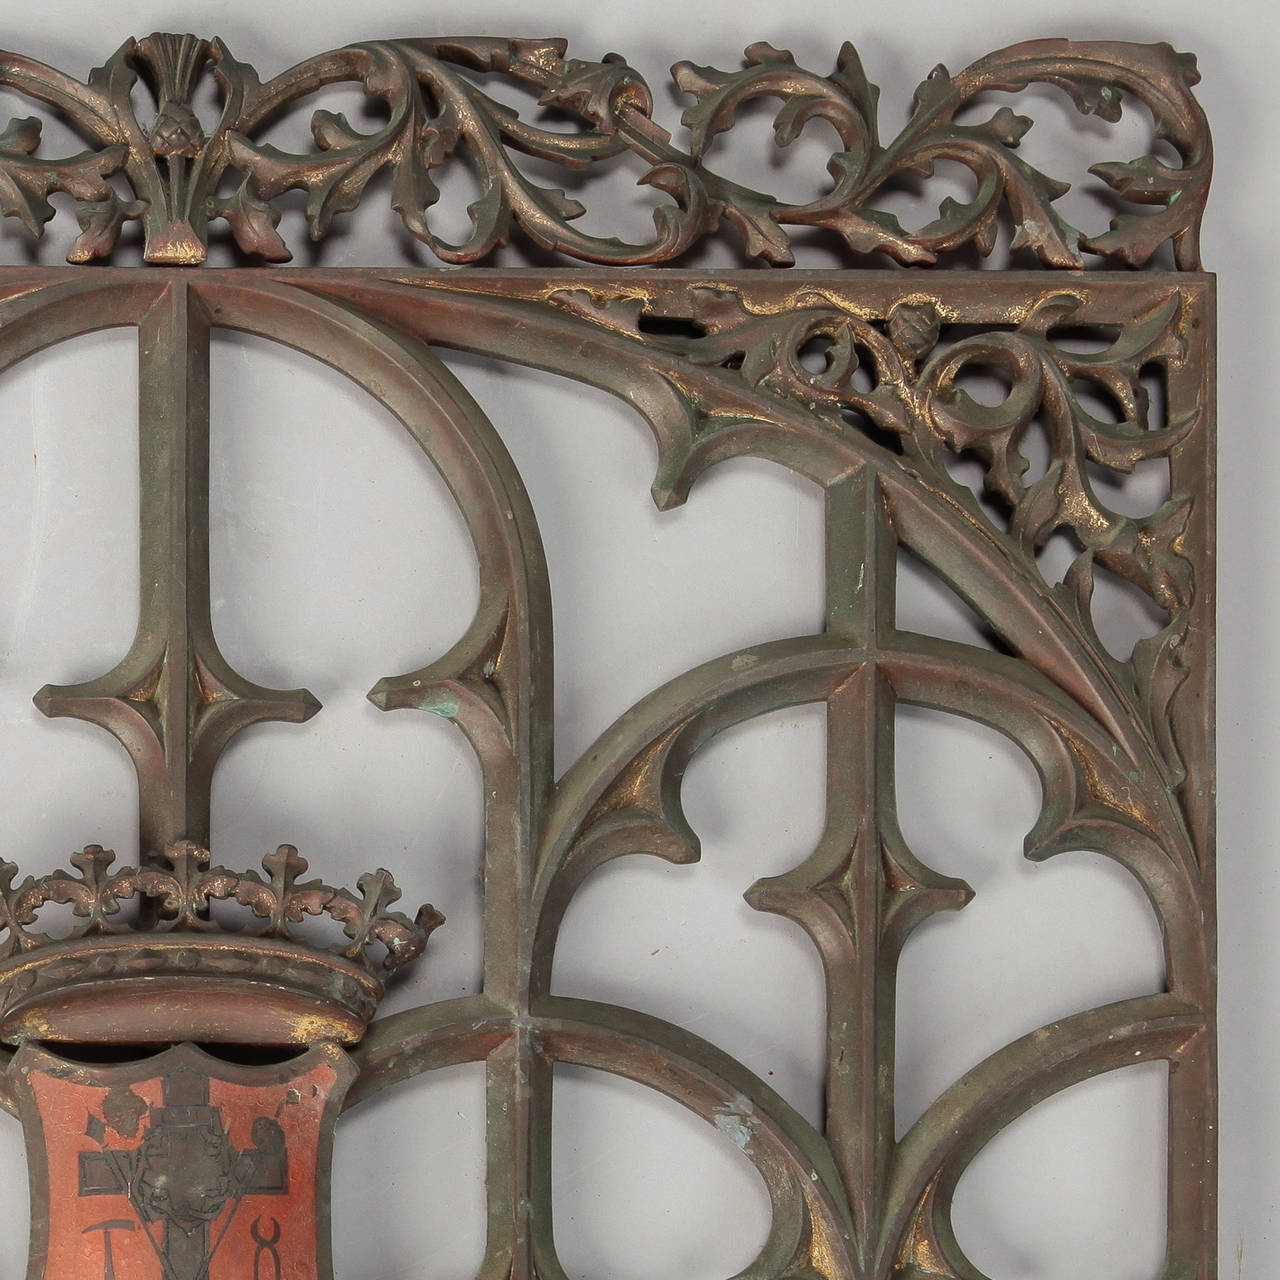 Found in France, this circa 1880s gothic iron and bronze open work decorative grate or grill was probably first used to protect or cover a window or vent. Beautifully rendered detail work and patina.